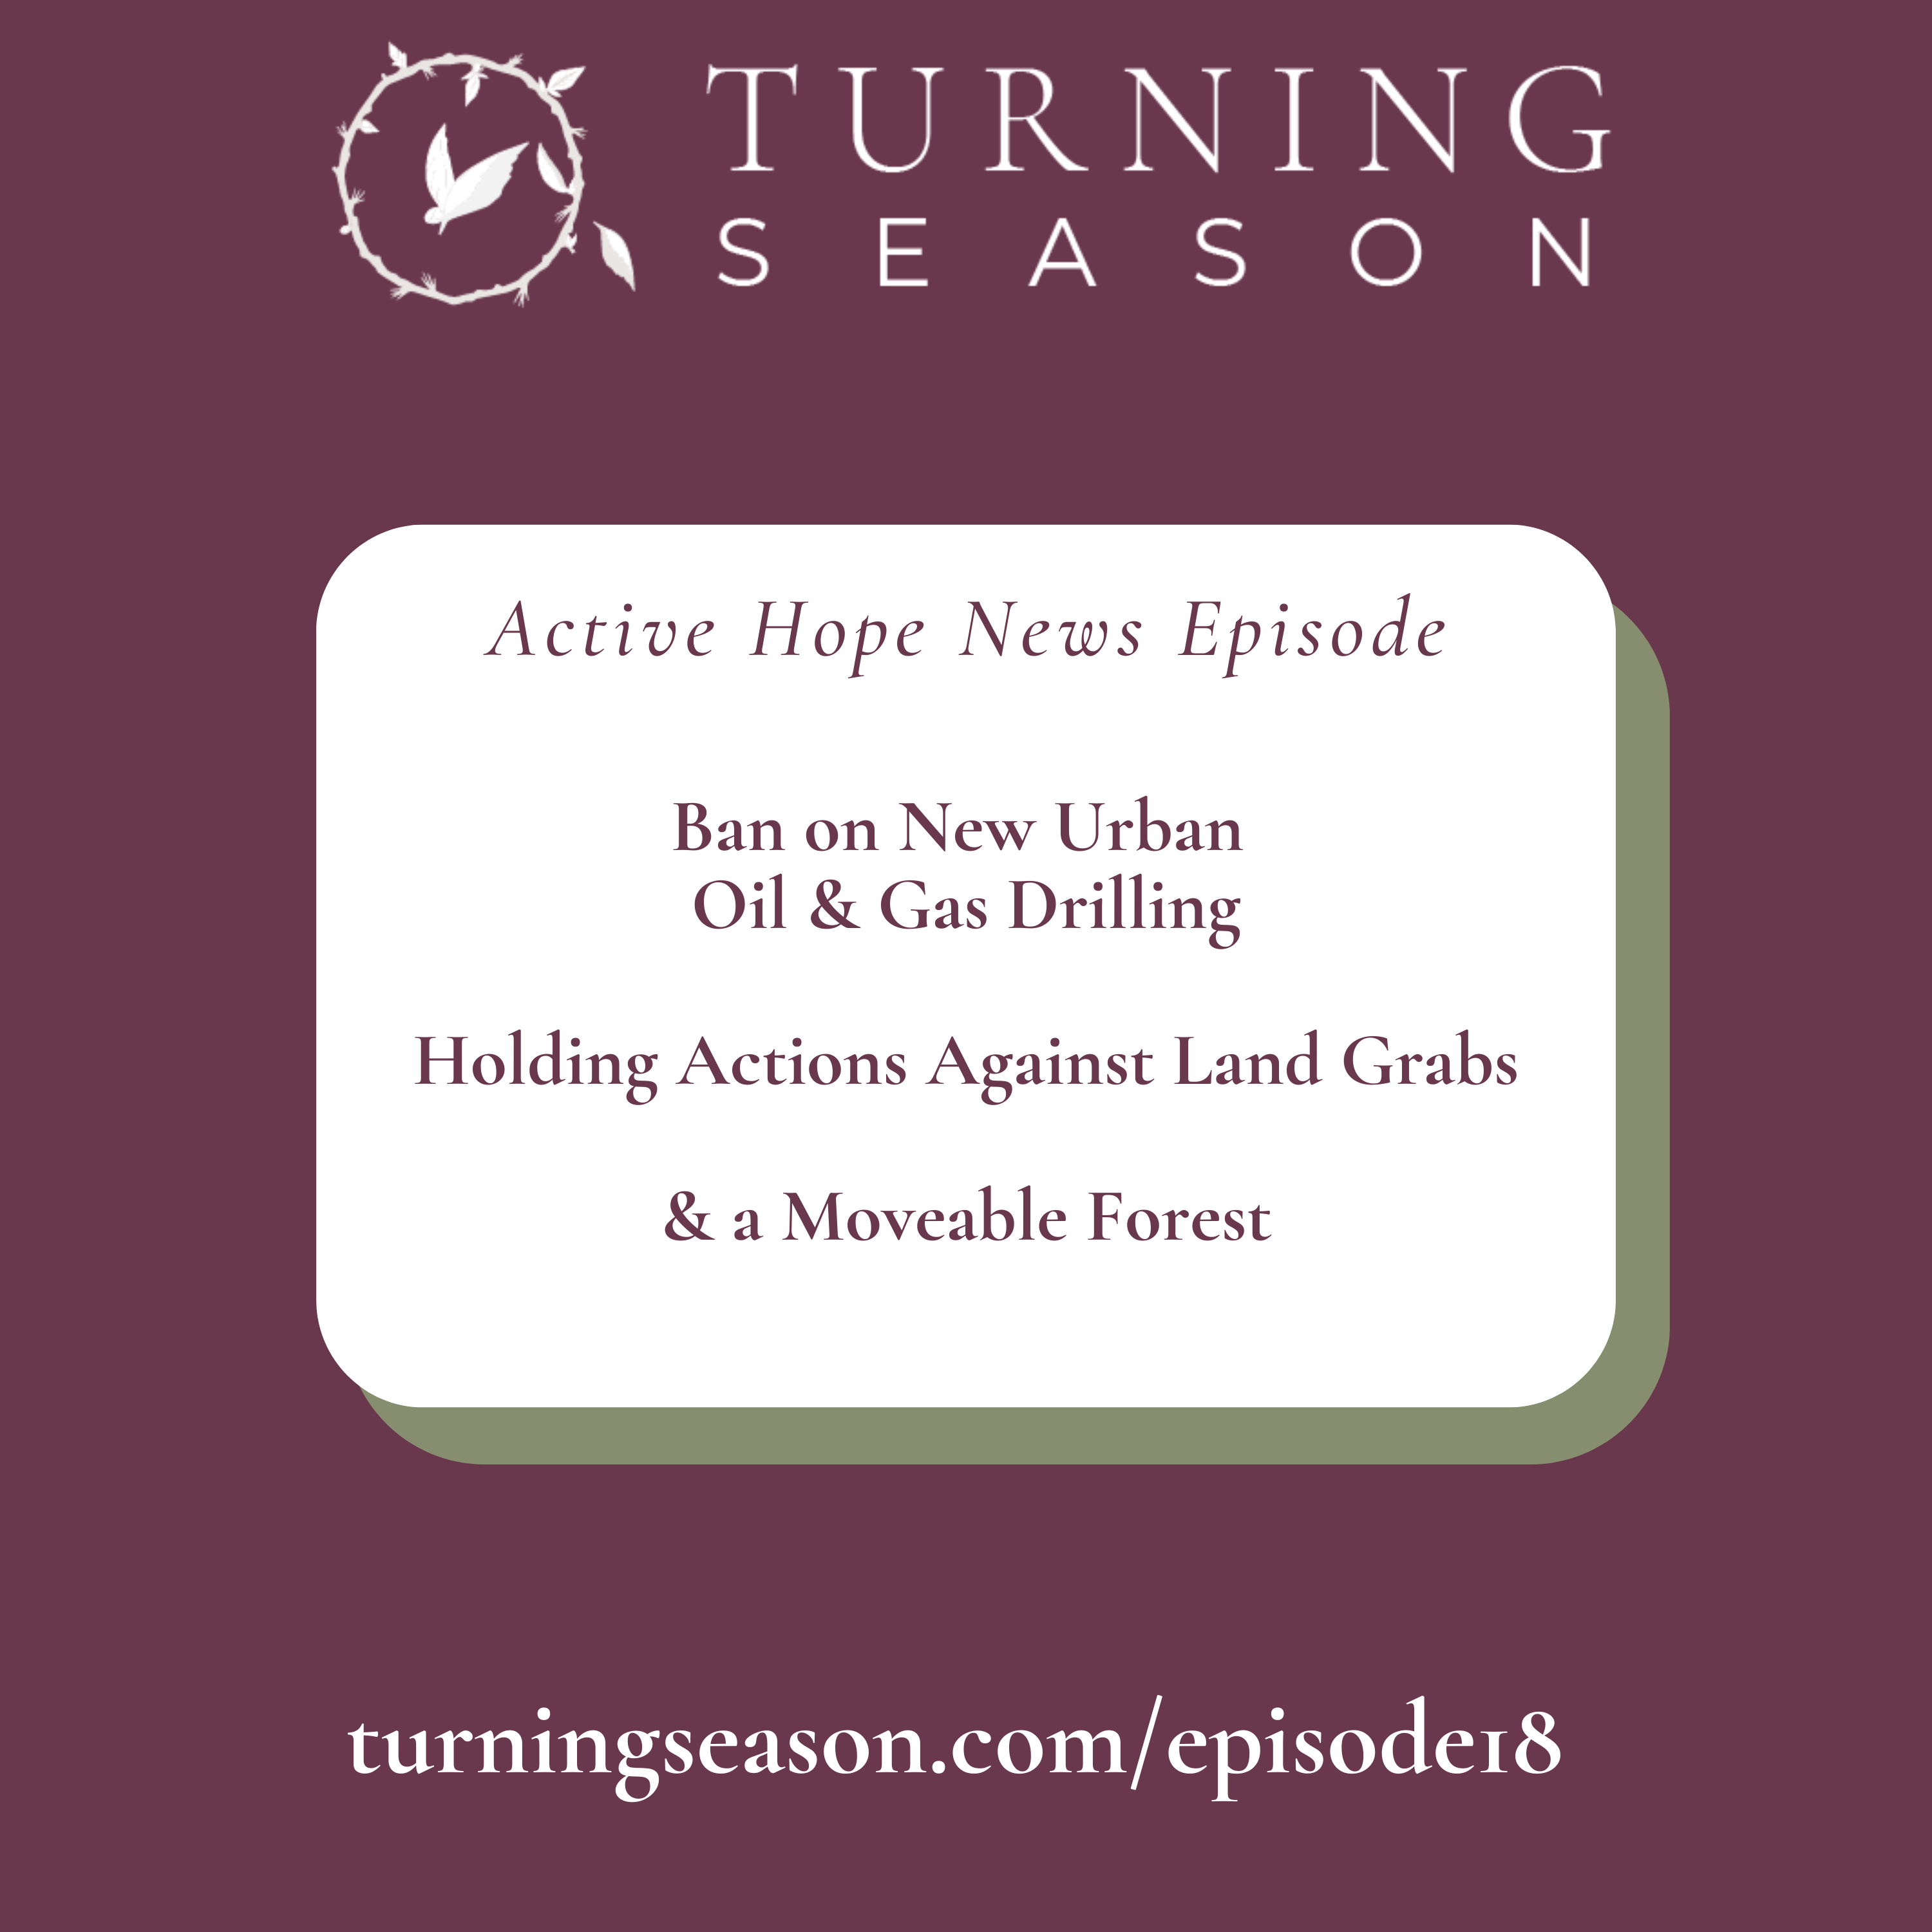 Turning Season Podcast Episode 18 News on Banning Urban Oil and Gas Drilling, Holding Actions Against Land Grabs, and a Moveable Forest hosted by Leilani Navar turningseason.com